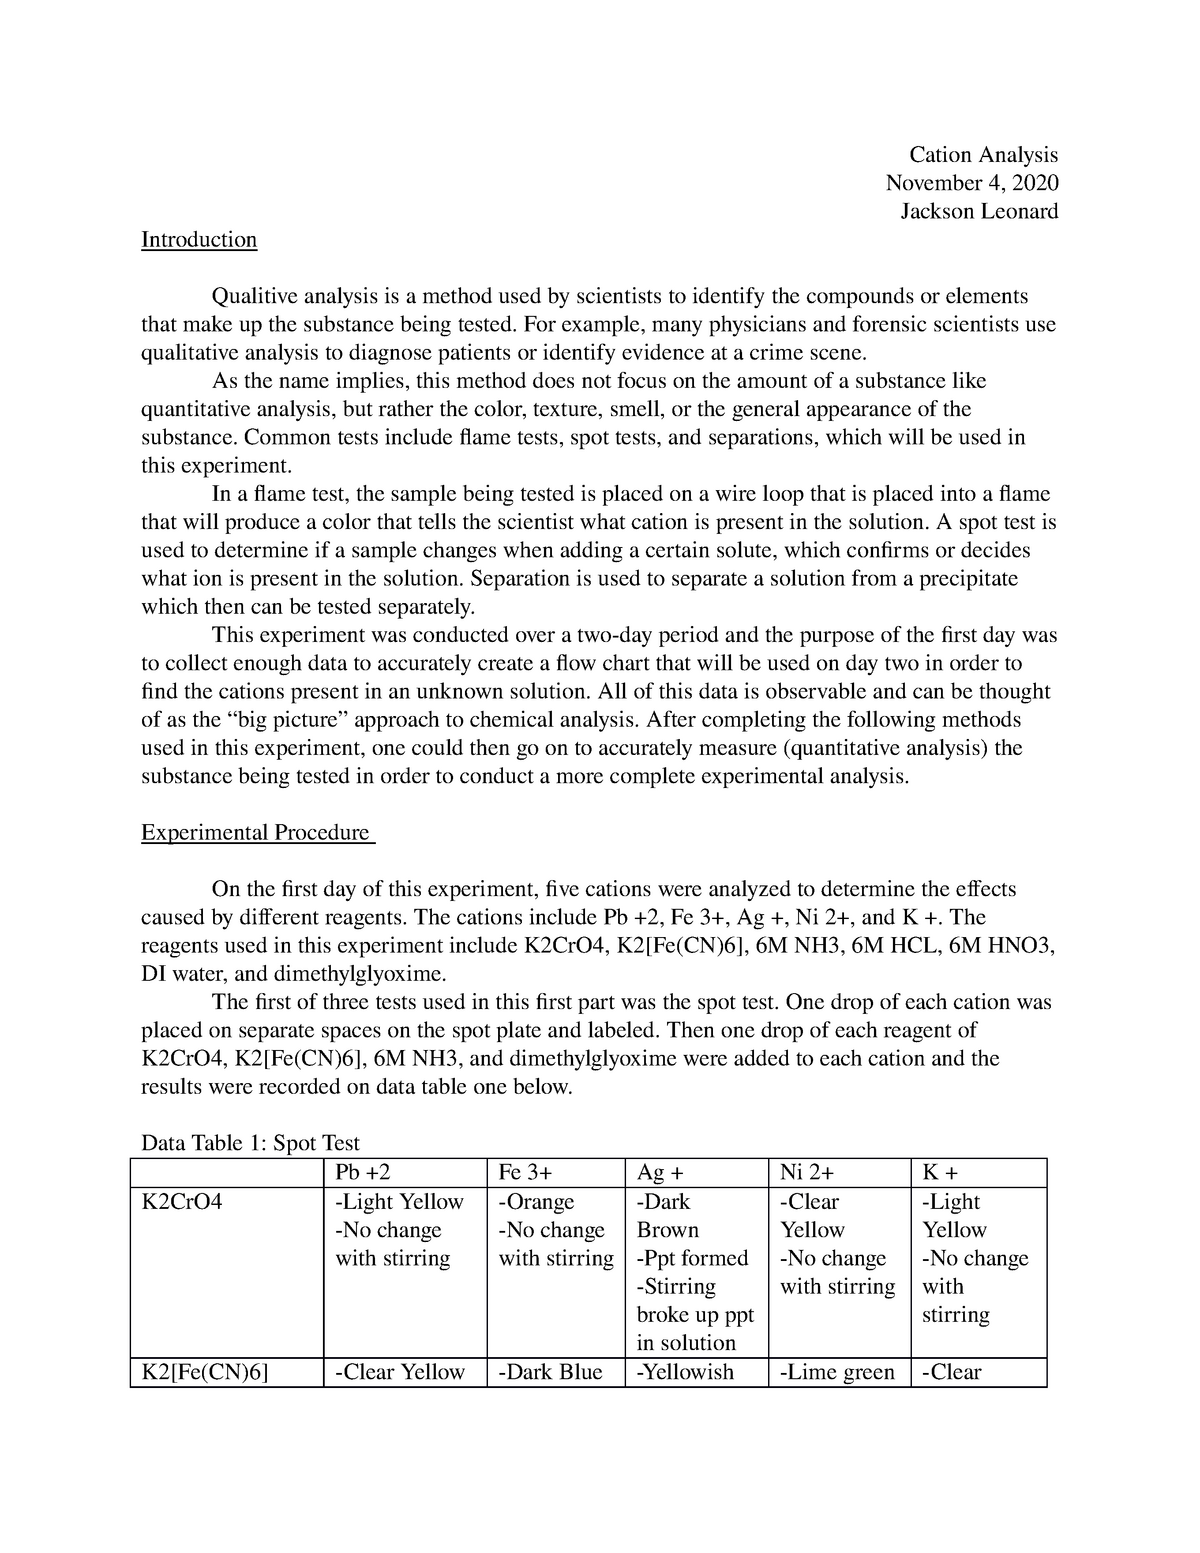 Cation Analysis Formal Report - Cation Analysis November 4, 2020 ...